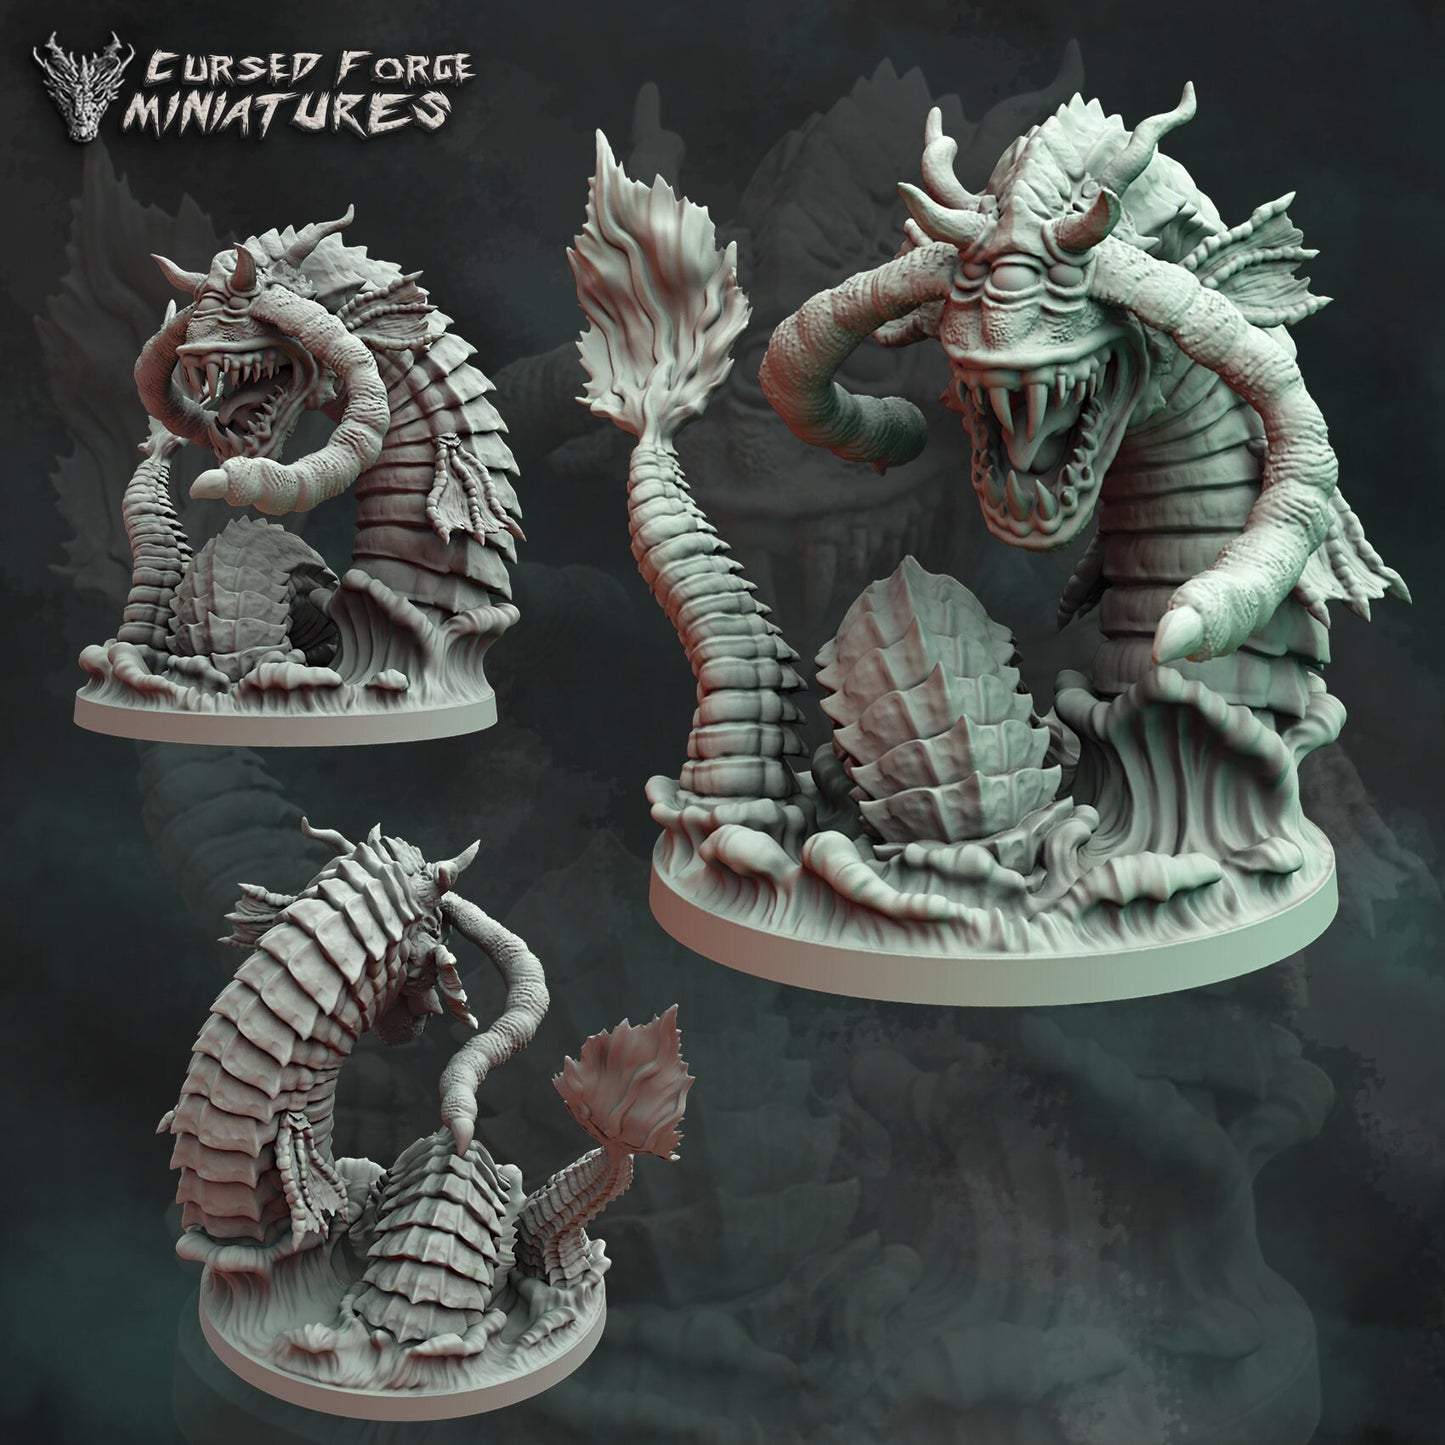 ABOLETH, by Cursed Forge Miniatures // 3D Print on Demand / D&D / Pathfinder / RPG